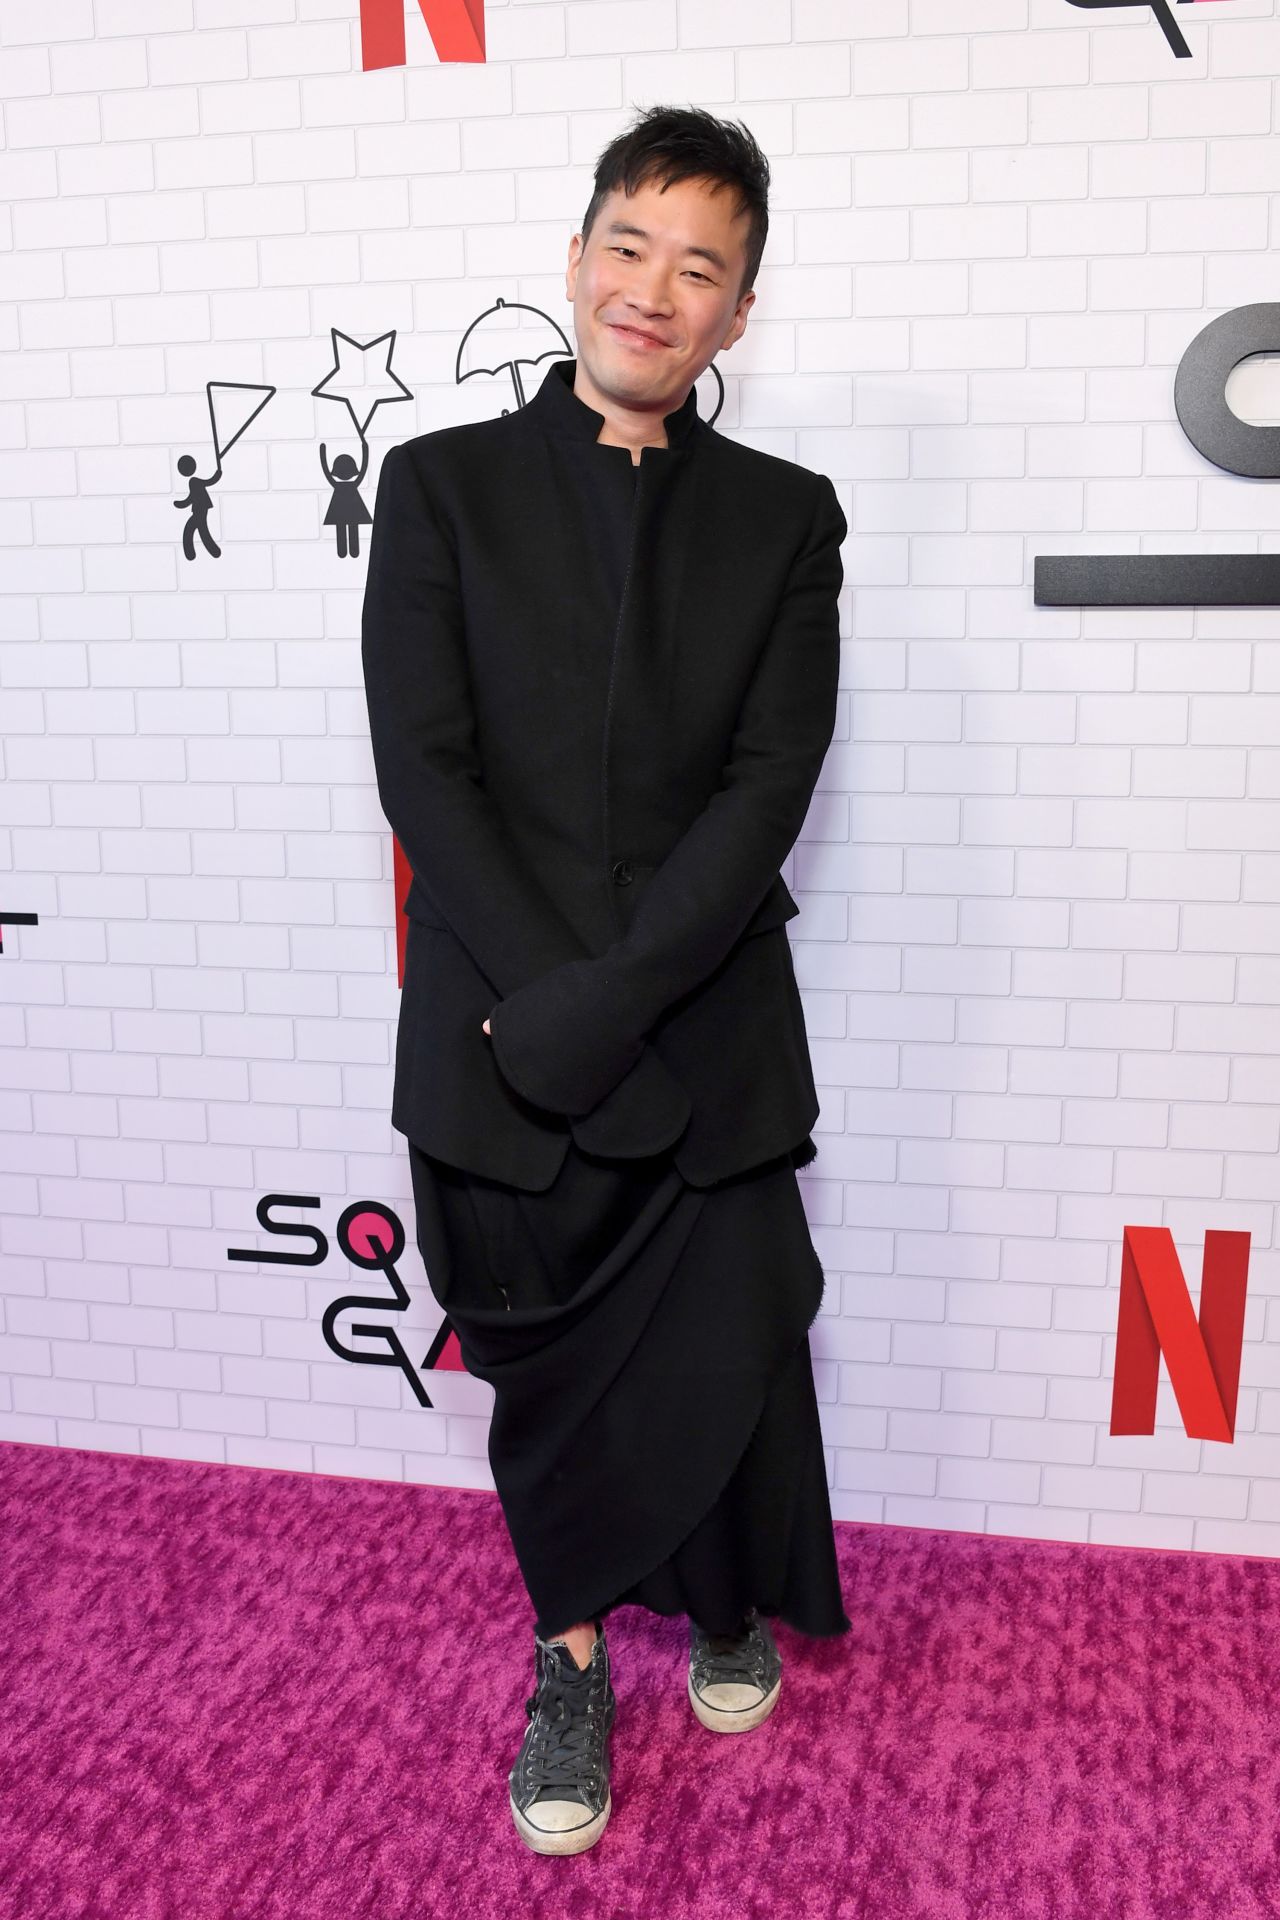 "Squid Game" composer Jung Jae-il attended a Netflix event in Los Angeles this June wearing a long black skirt.